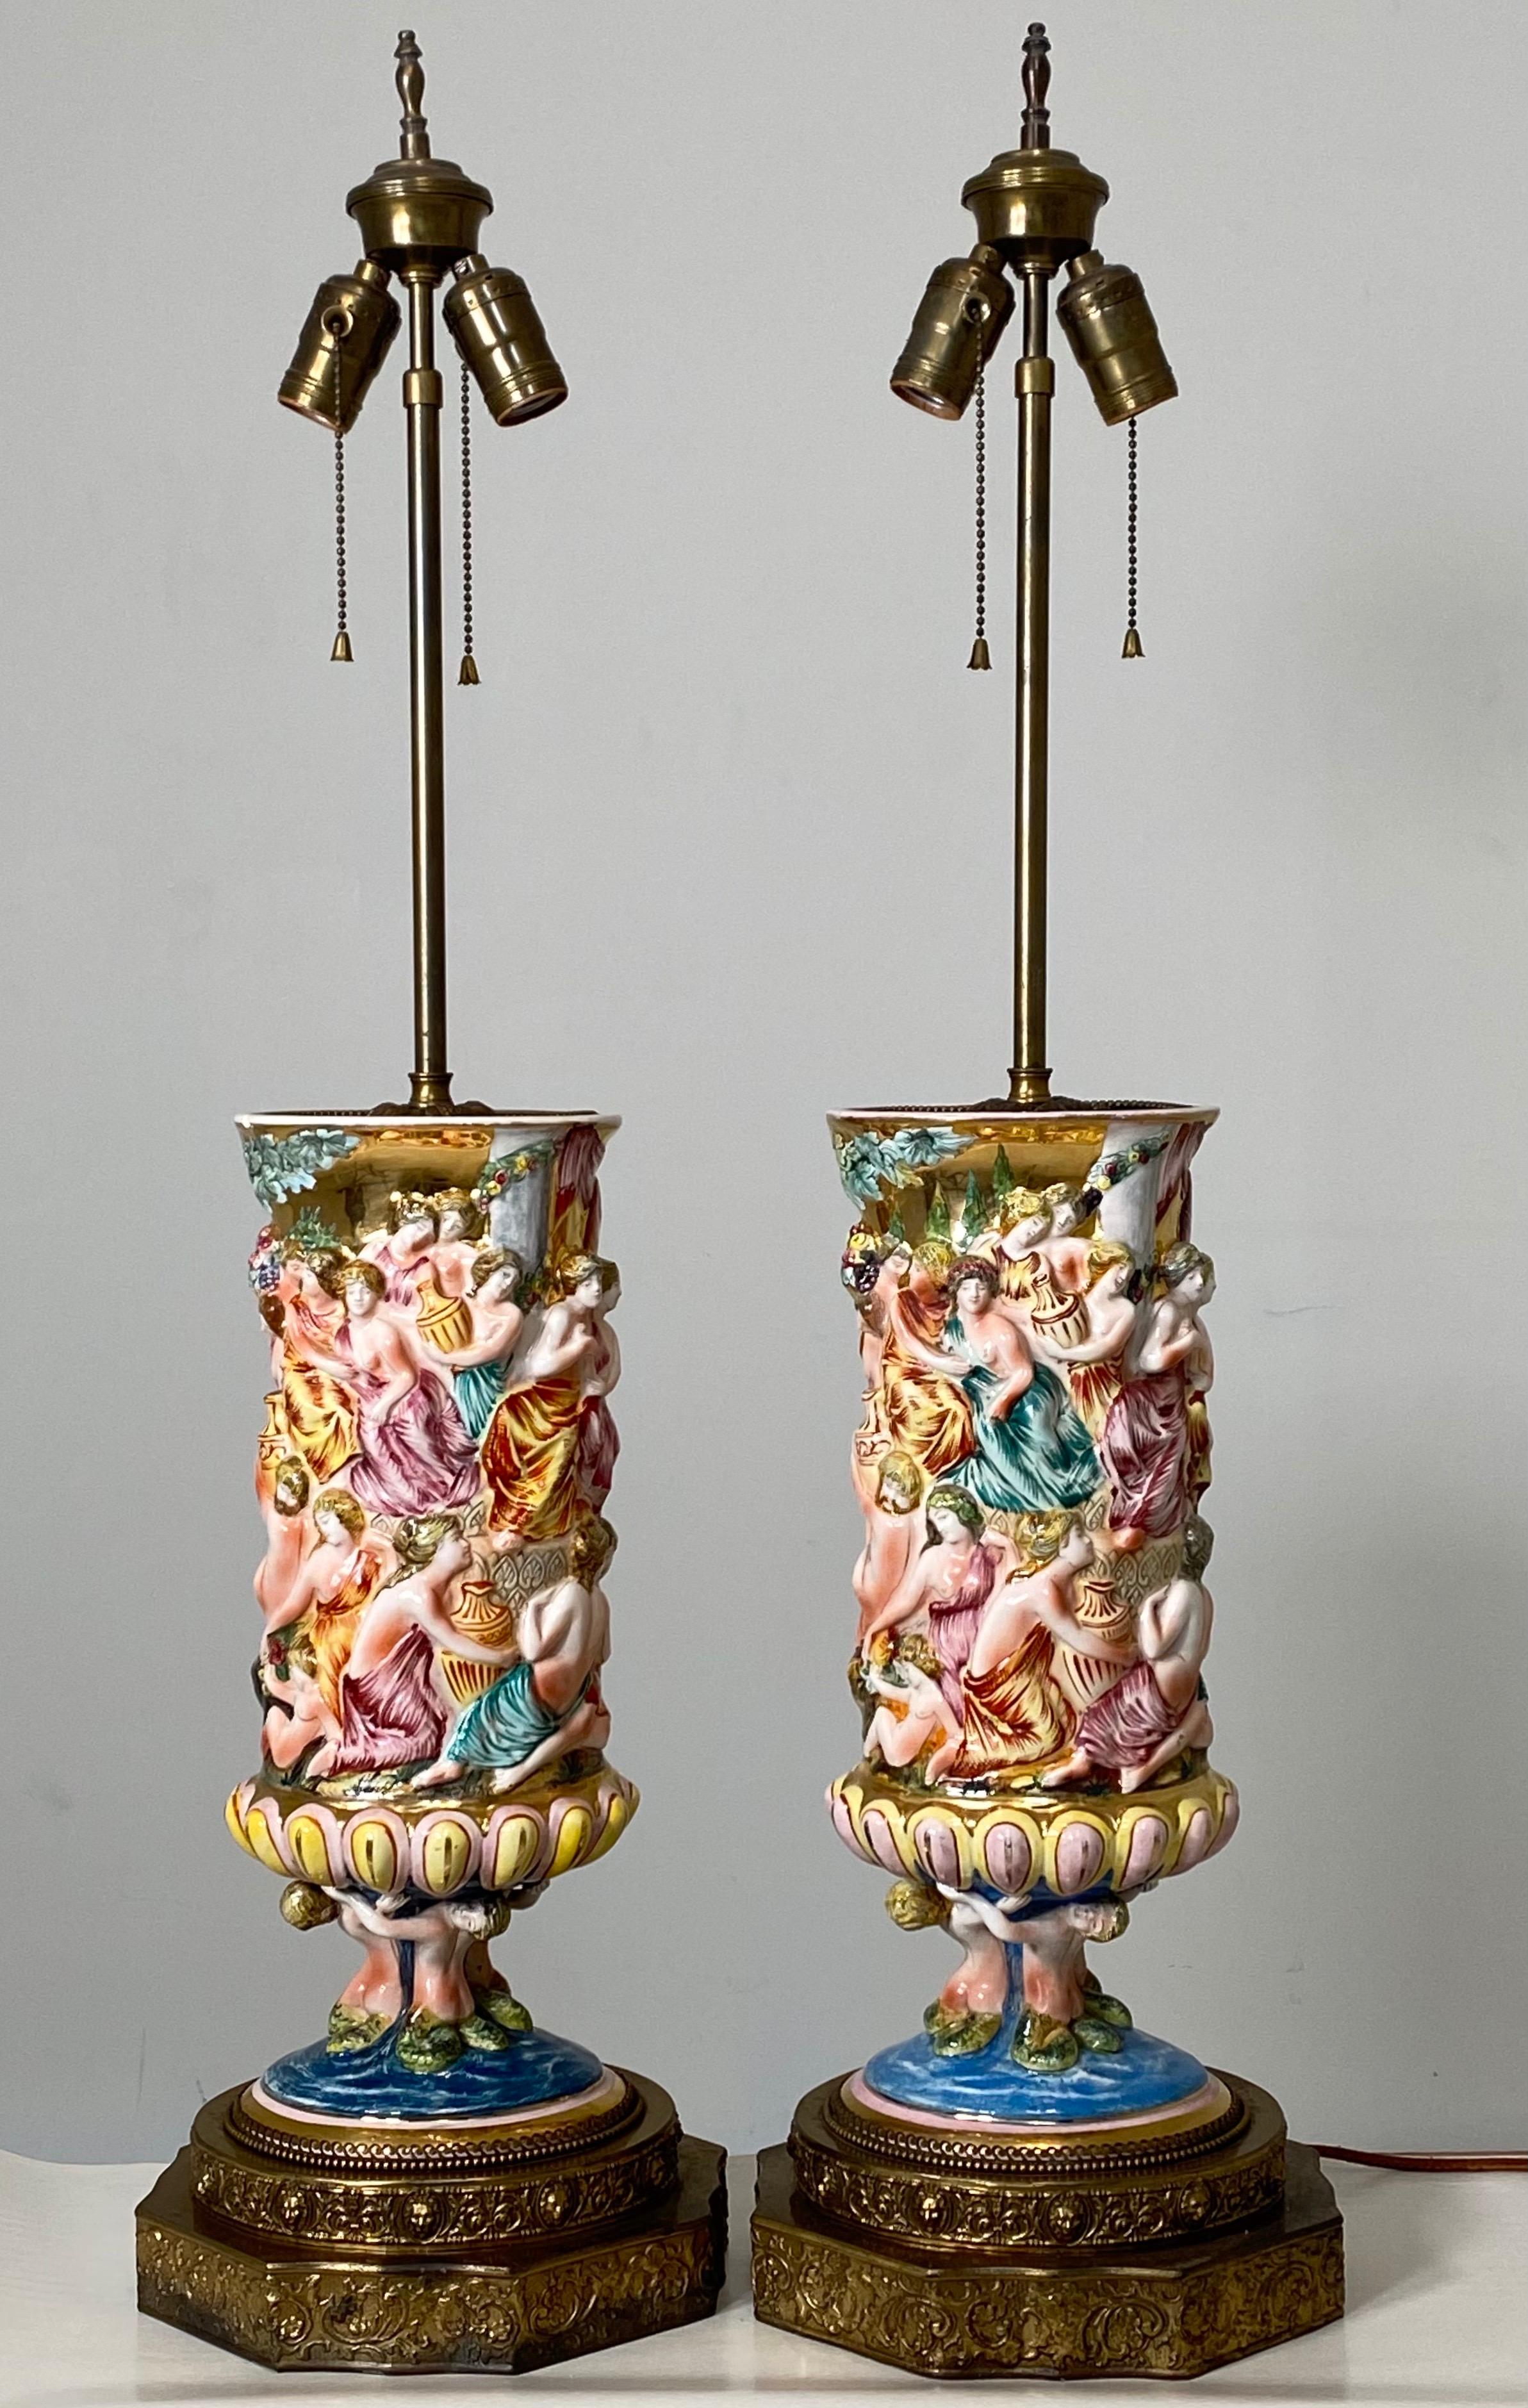 Large and uncommon Capodimonte. Produced between 1920 and 1950. Each lamp measures 35” tall, 9” wide and 8” deep. The ceramic porcelain component are each 16” tall, 6” deep and 7” wide. A rare pair to have. Each piece has a slightly different hand